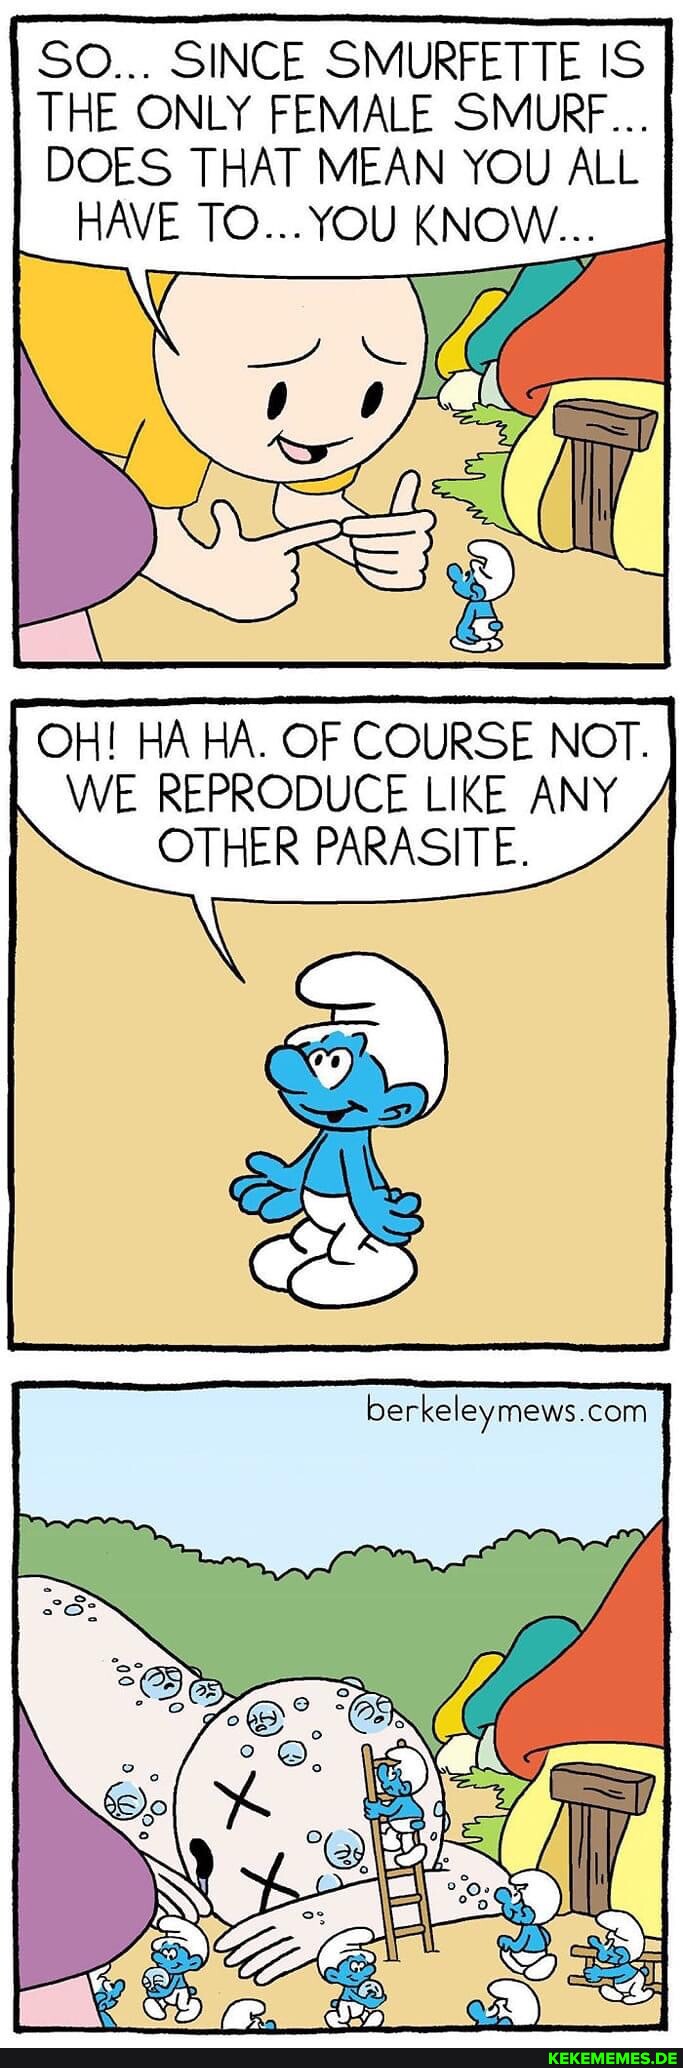 SO... SINCE SMURFETTE IS THE ONLY FEMALE SMURF... DOES THAT MEAN YOU ALL HAVE TO